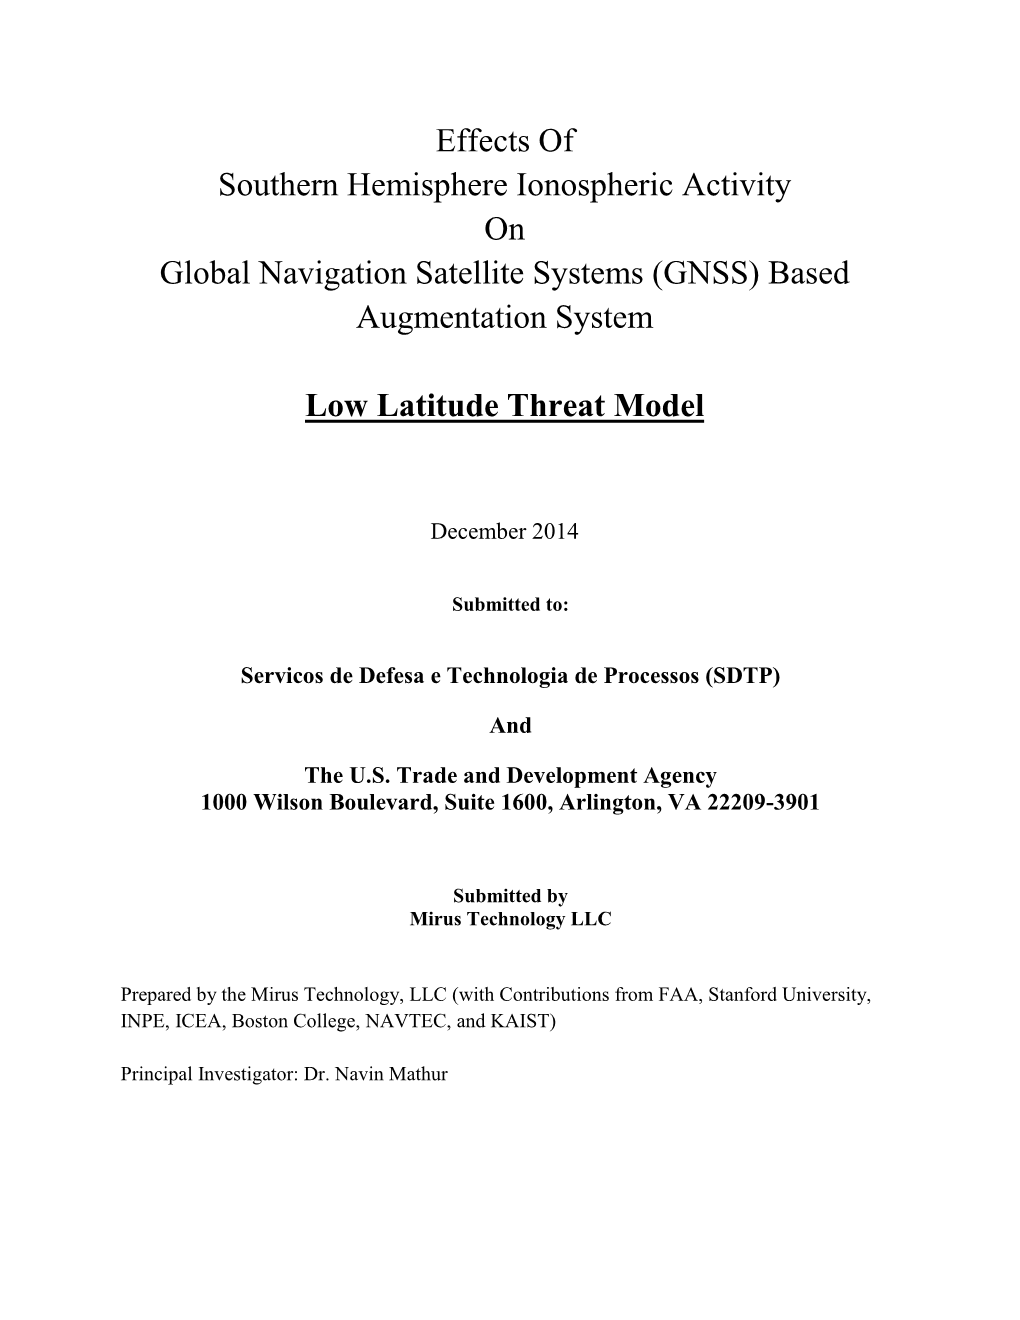 (GNSS) Based Augmentation System Low Latitude Threat Model